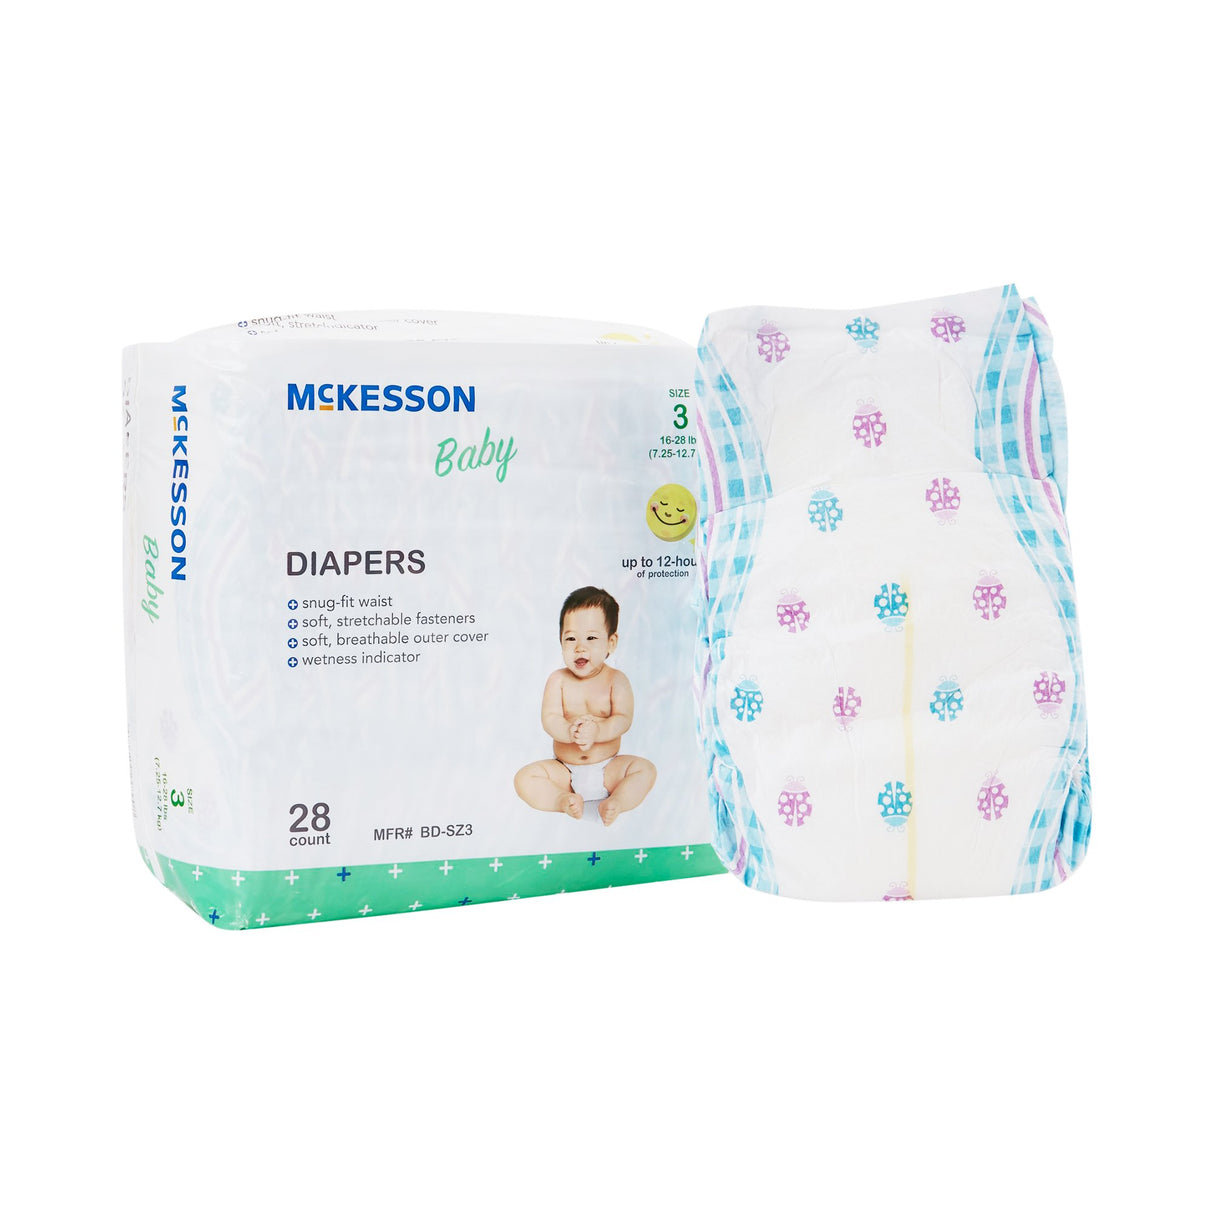 McKesson Baby Diapers, Size 3